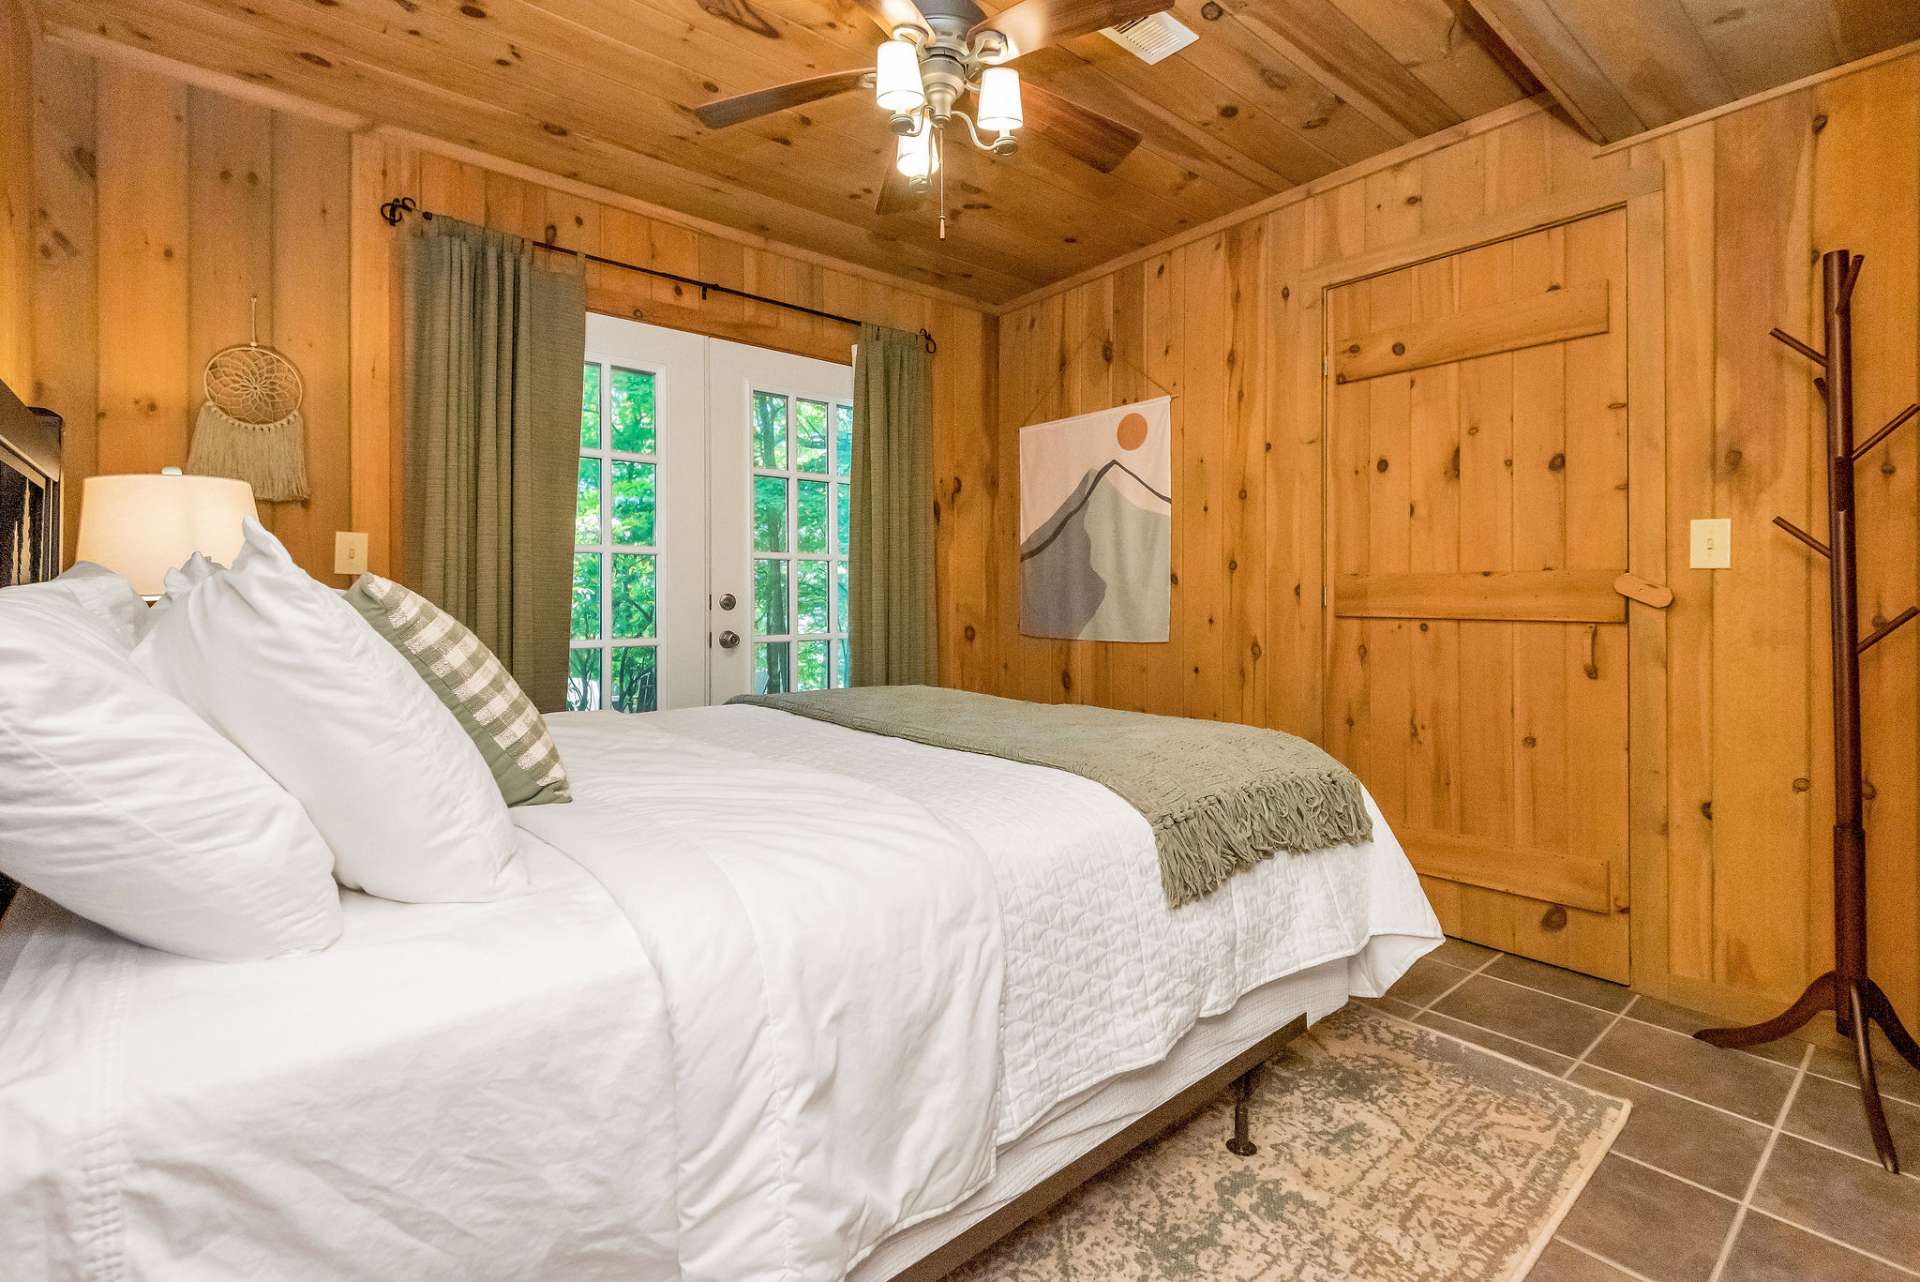 Lower level bedroom has french doors leading to the patio and a large walk-in closet.